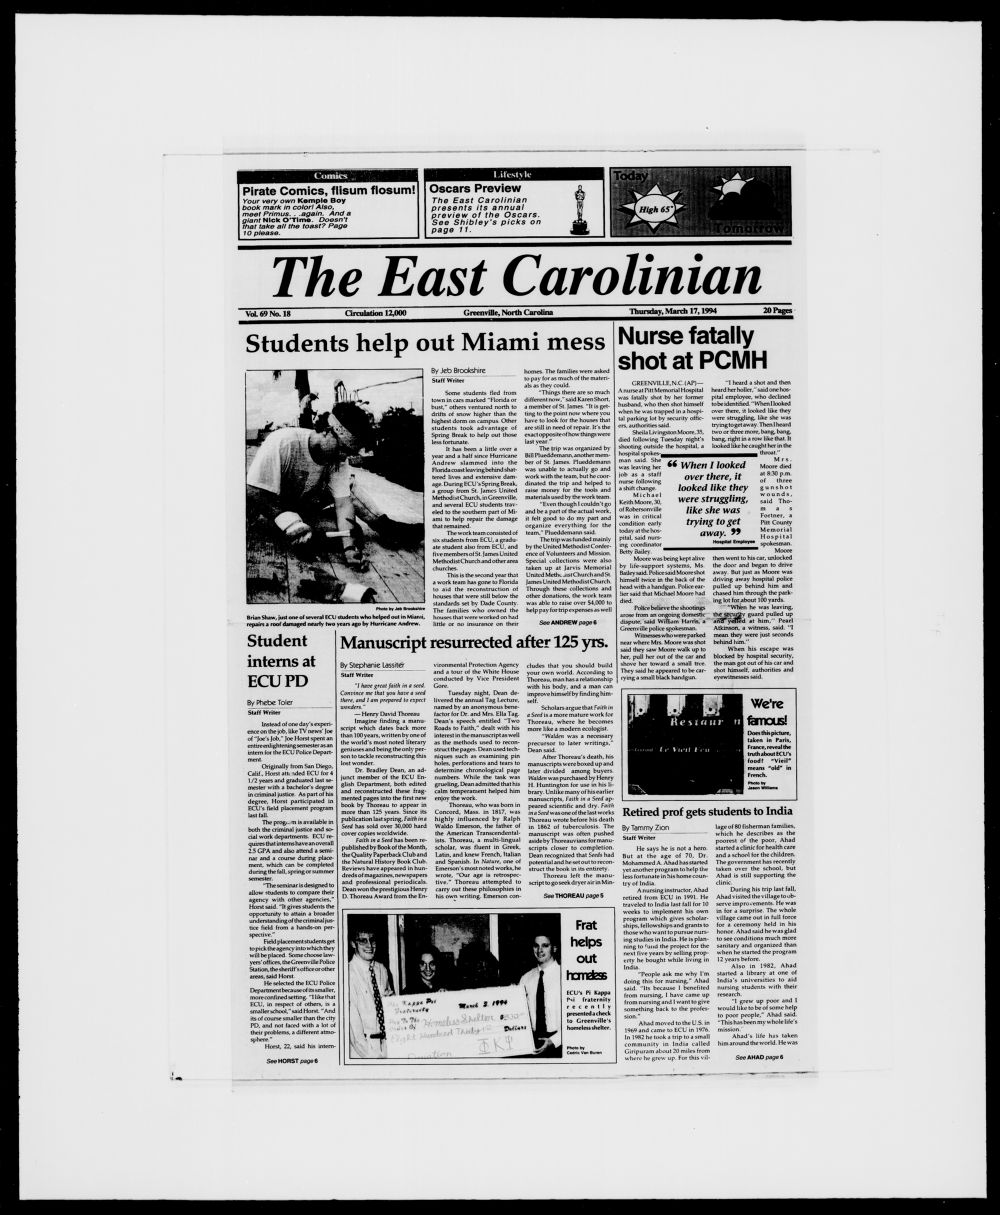 The East Carolinian, March 17, 1994 pic